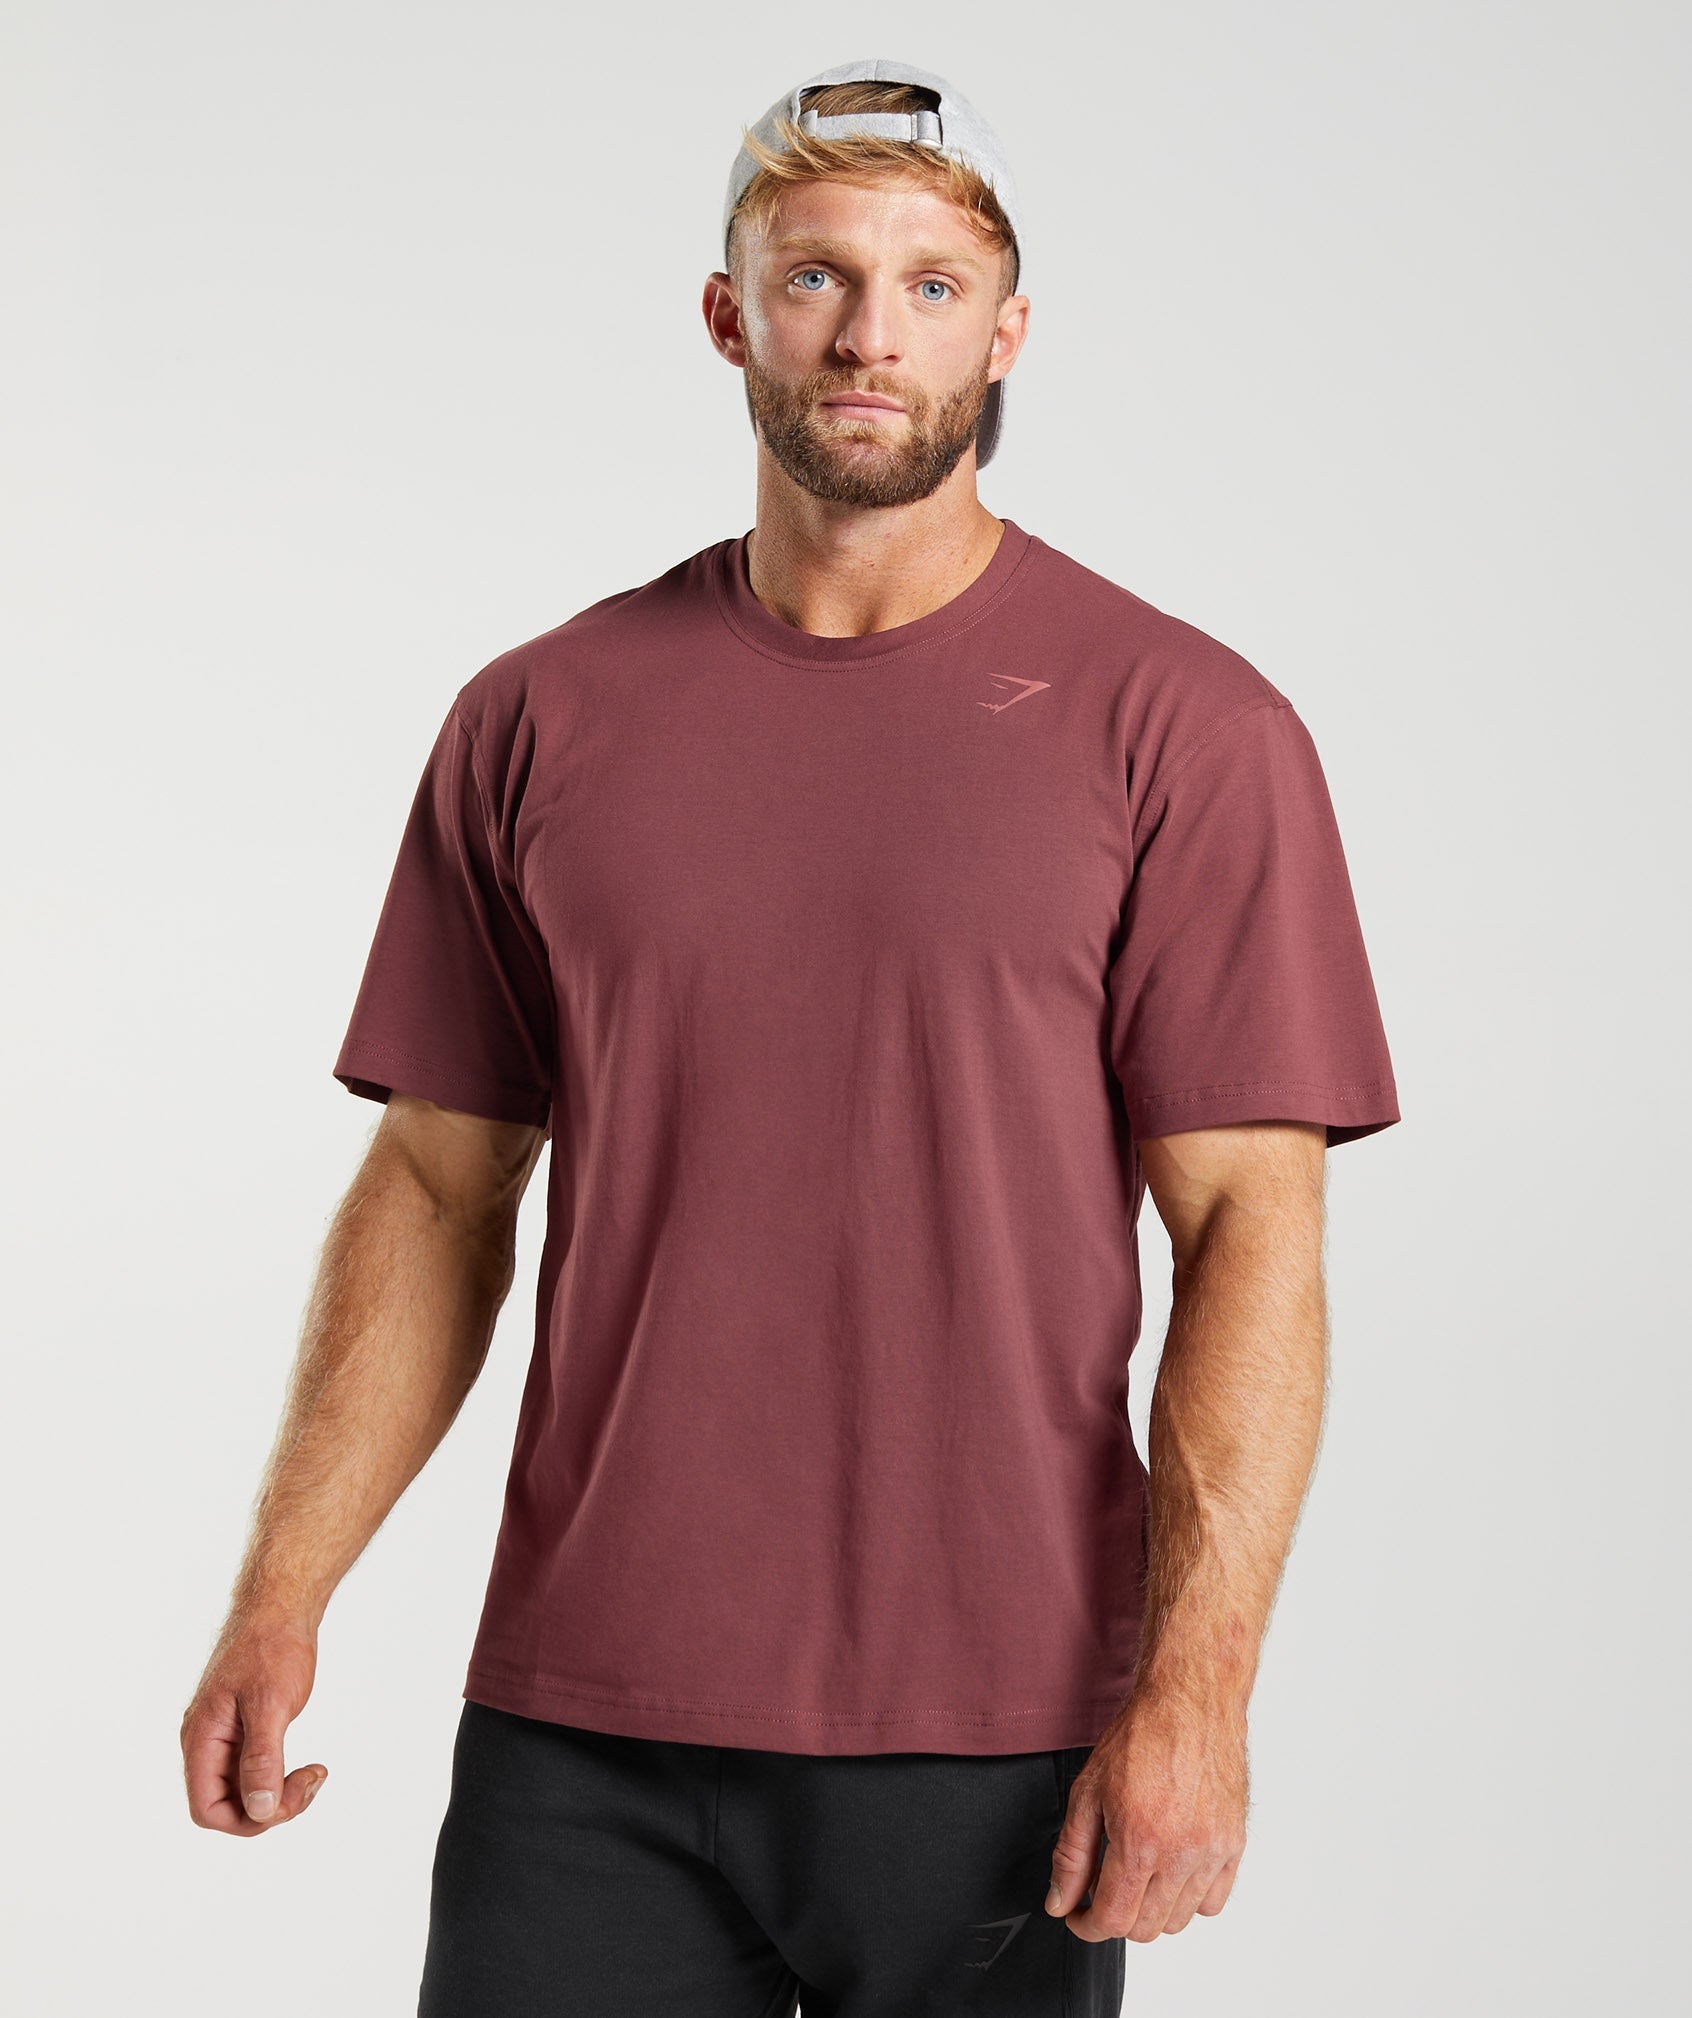 Power T-Shirt in Cherry Brown - view 2